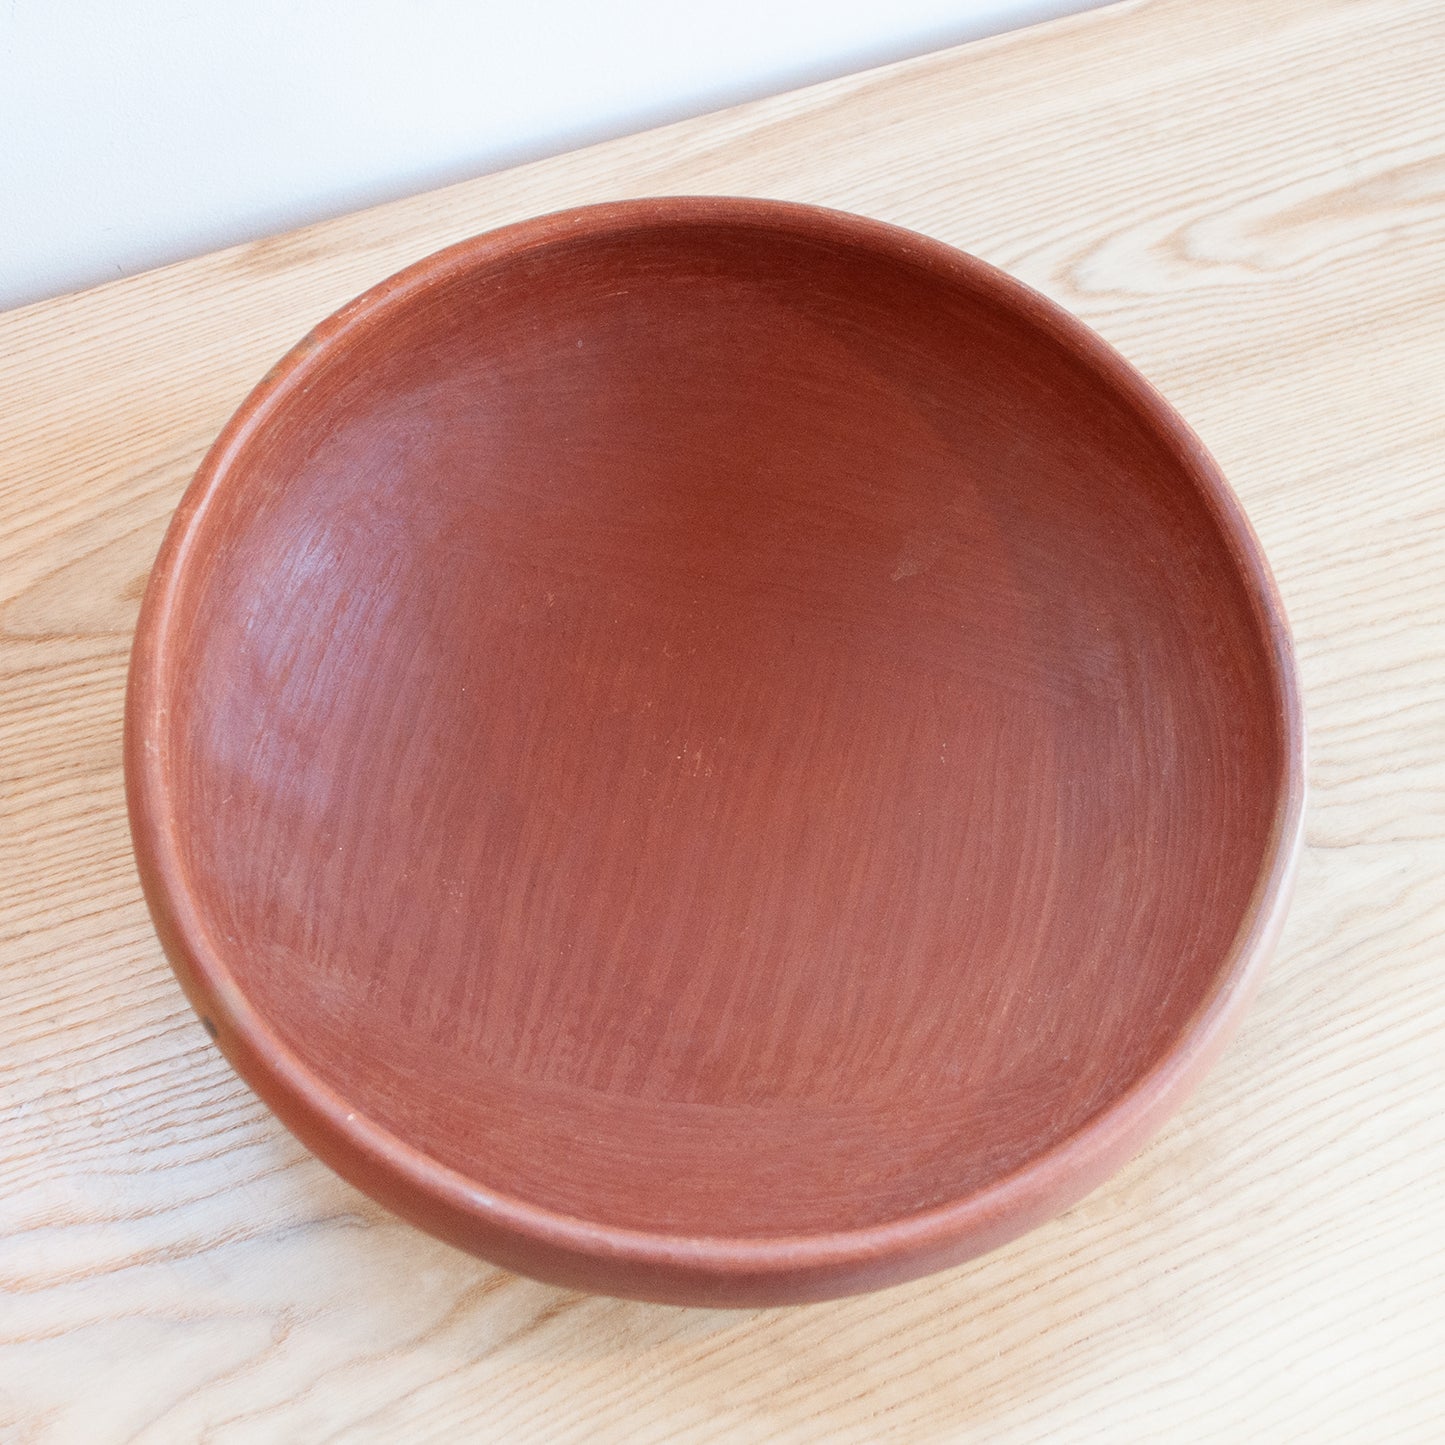 Wide Bowl